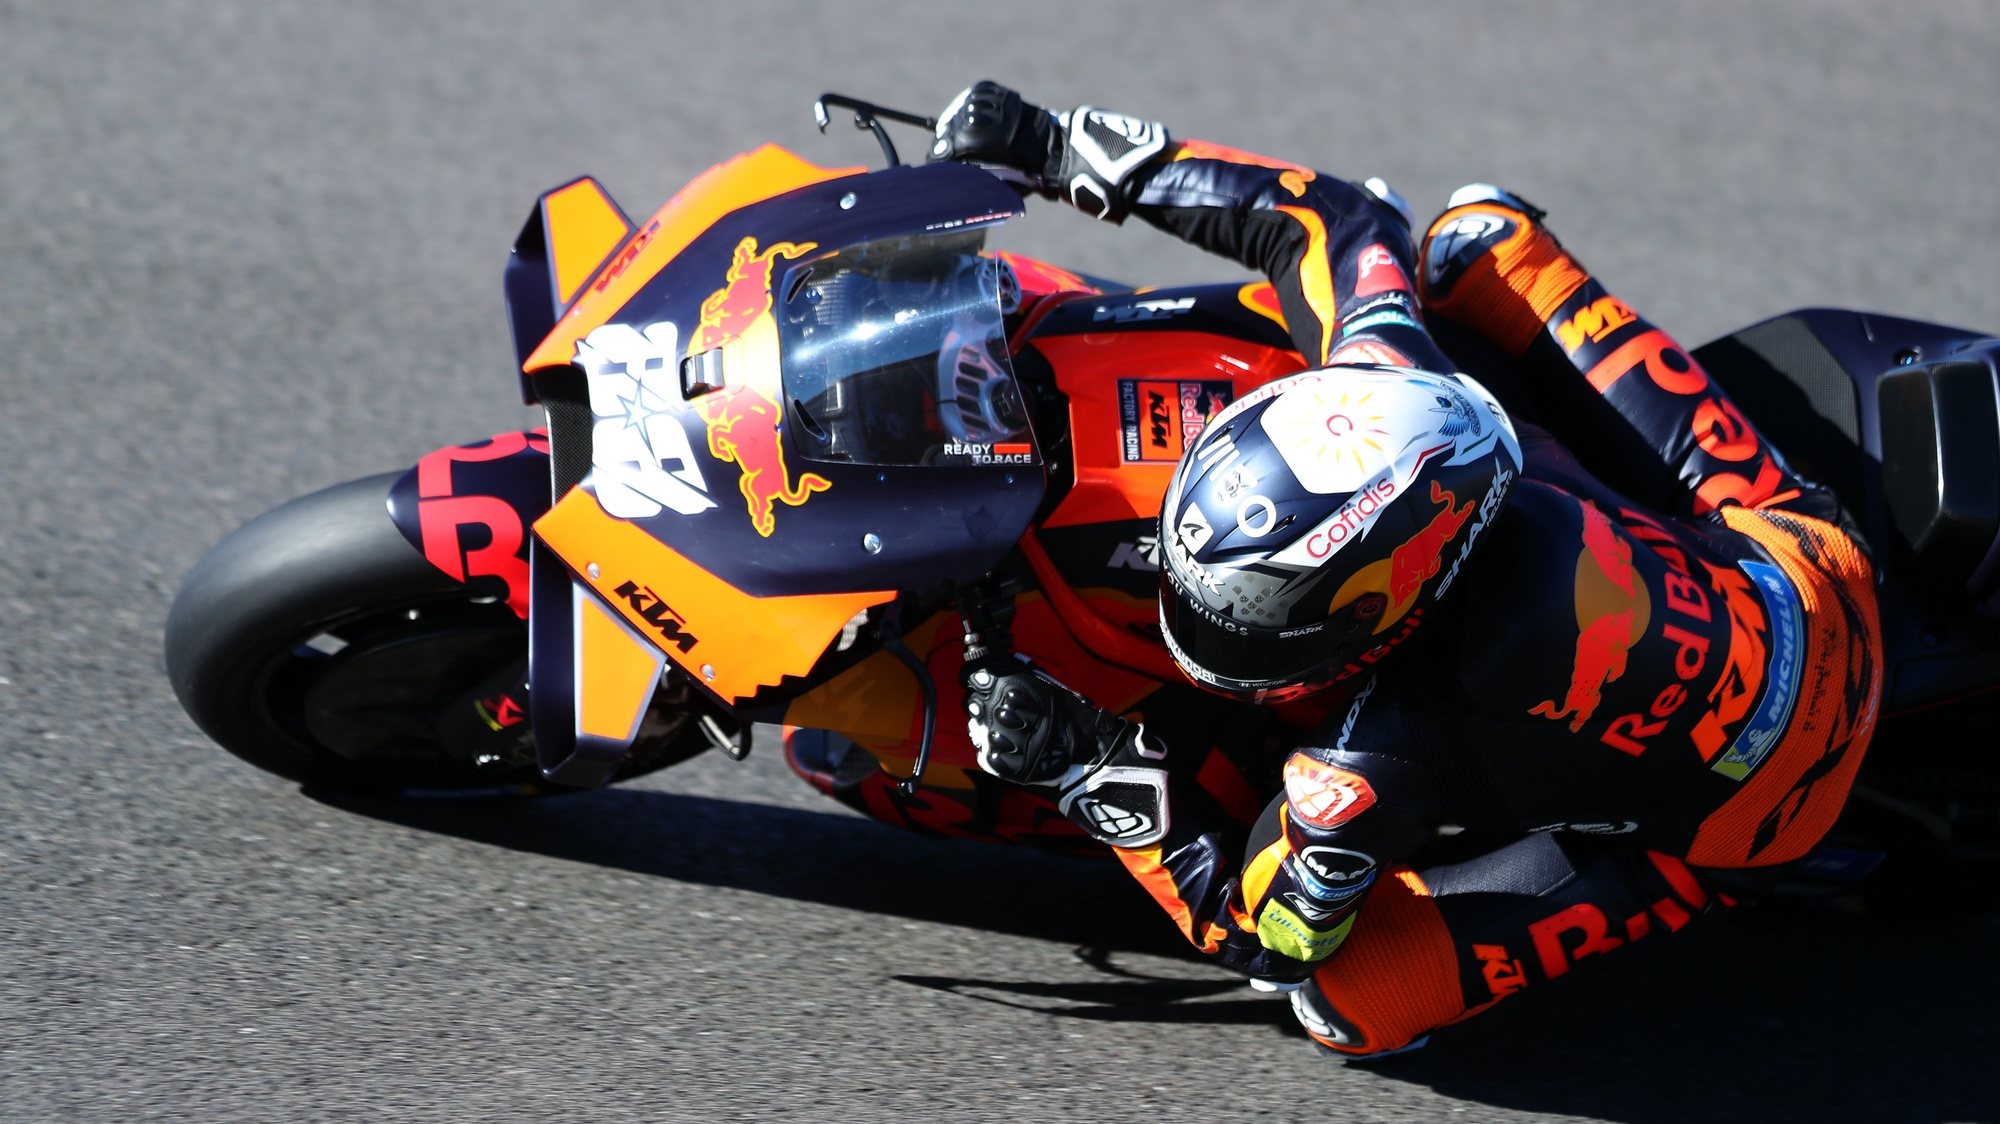 Portuguese MotoGP rider Miguel Oliveira of Red Bull KTM Factory Racing team in action during the fourth practice session for the Algarve Motorcycling Grand Prix at the Algarve International race track in Portimao, Southern of Portugal, 06 November 2021. The Algarve Motorcycling Grand Prix takes place on 07 November. NUNO VEIGA/LUSA